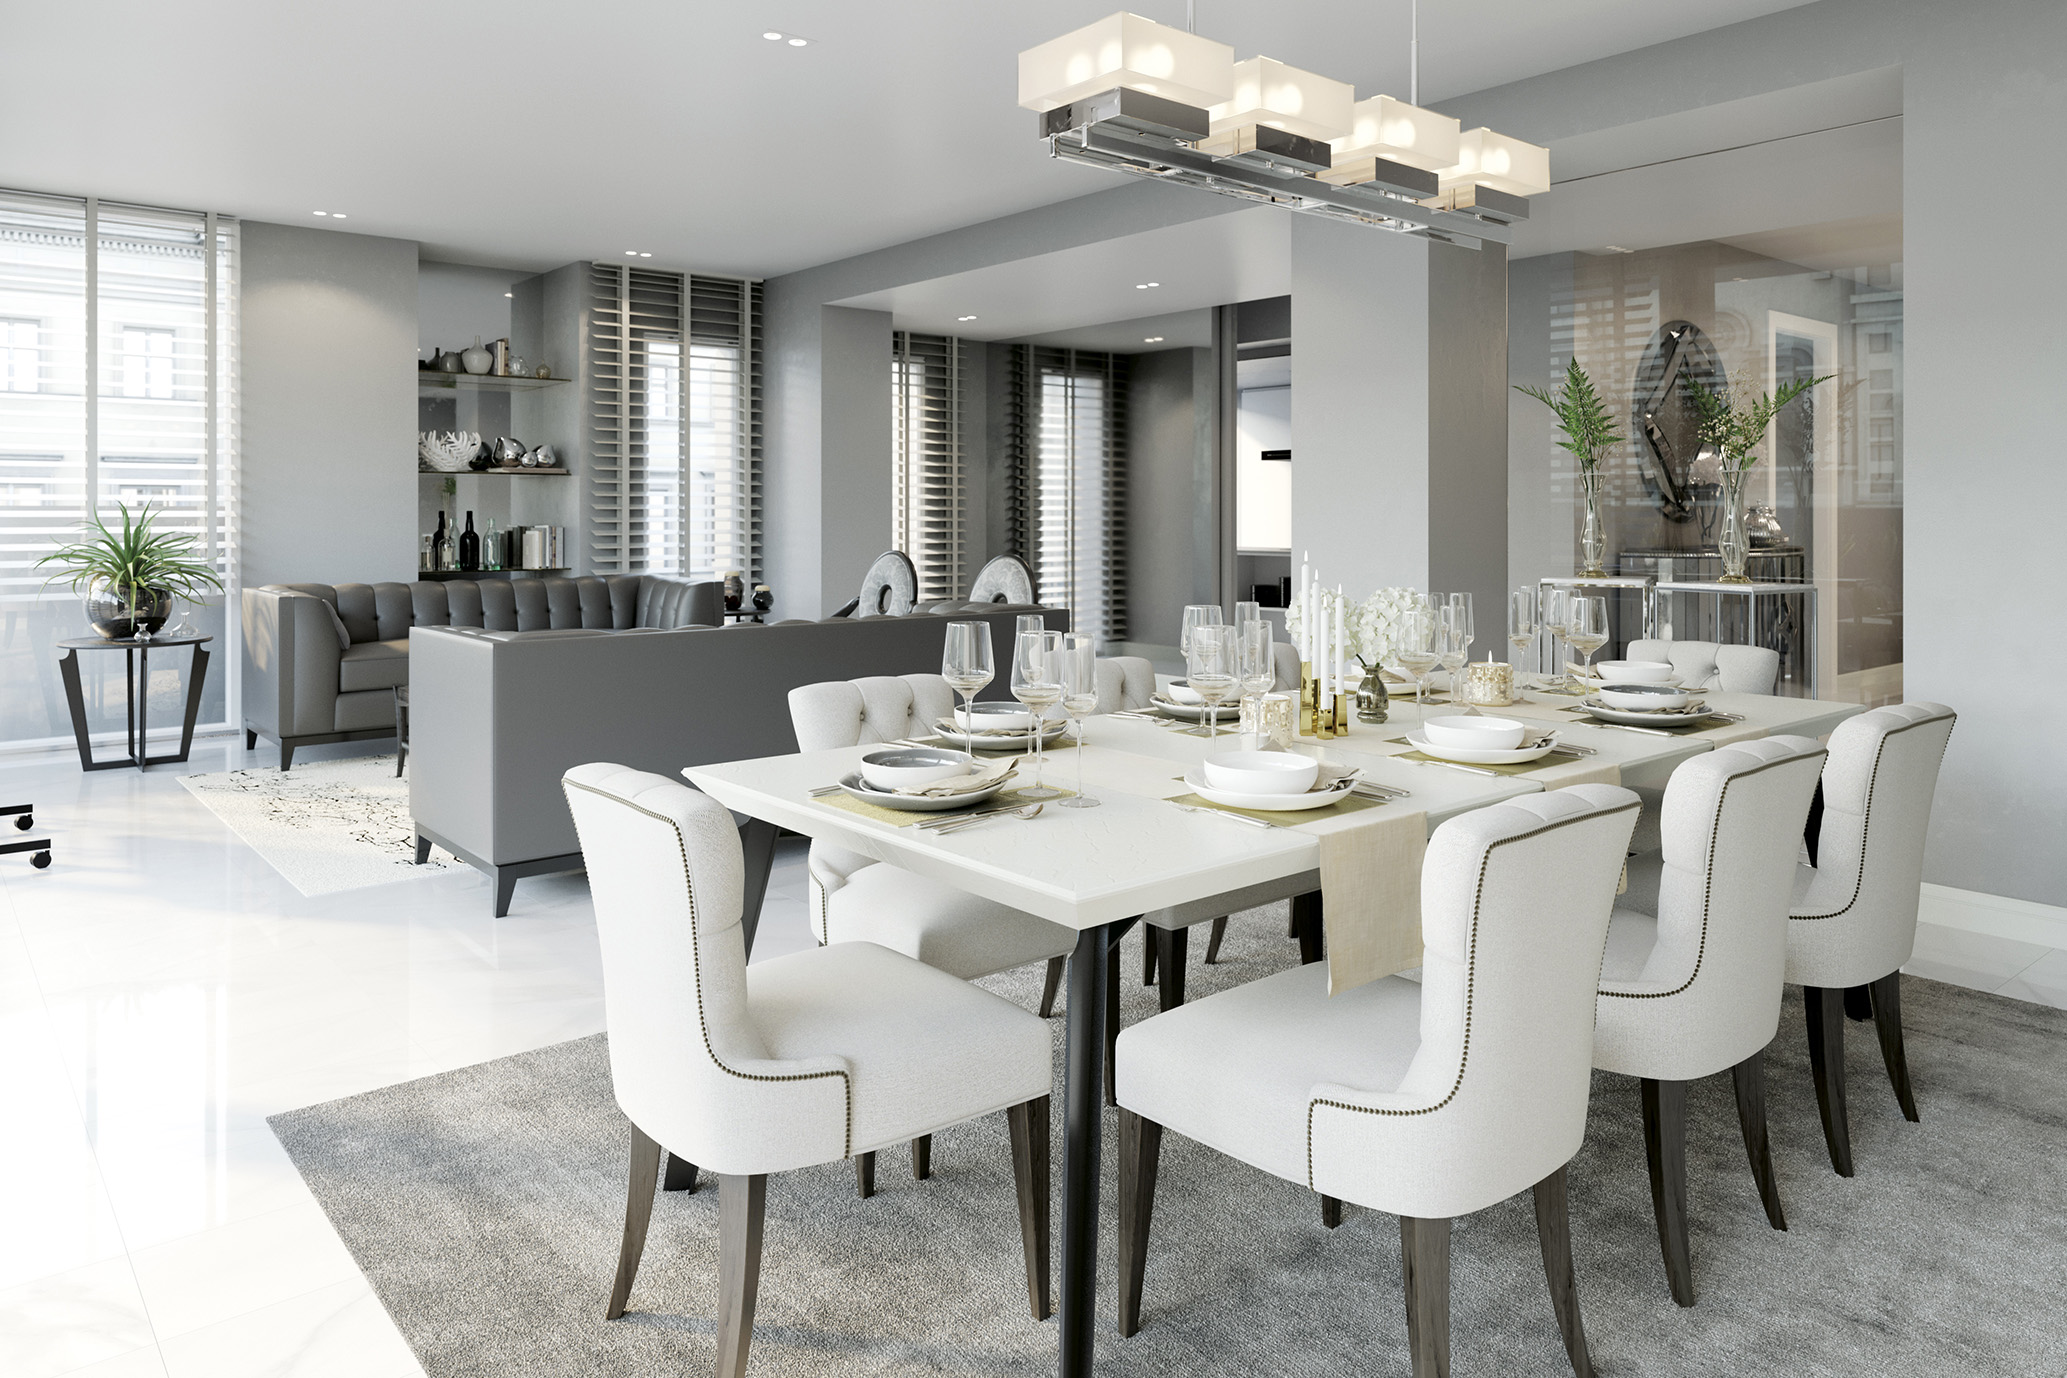 Luxury Dining Room Sets, Contemporary Dining Room Chairs Uk